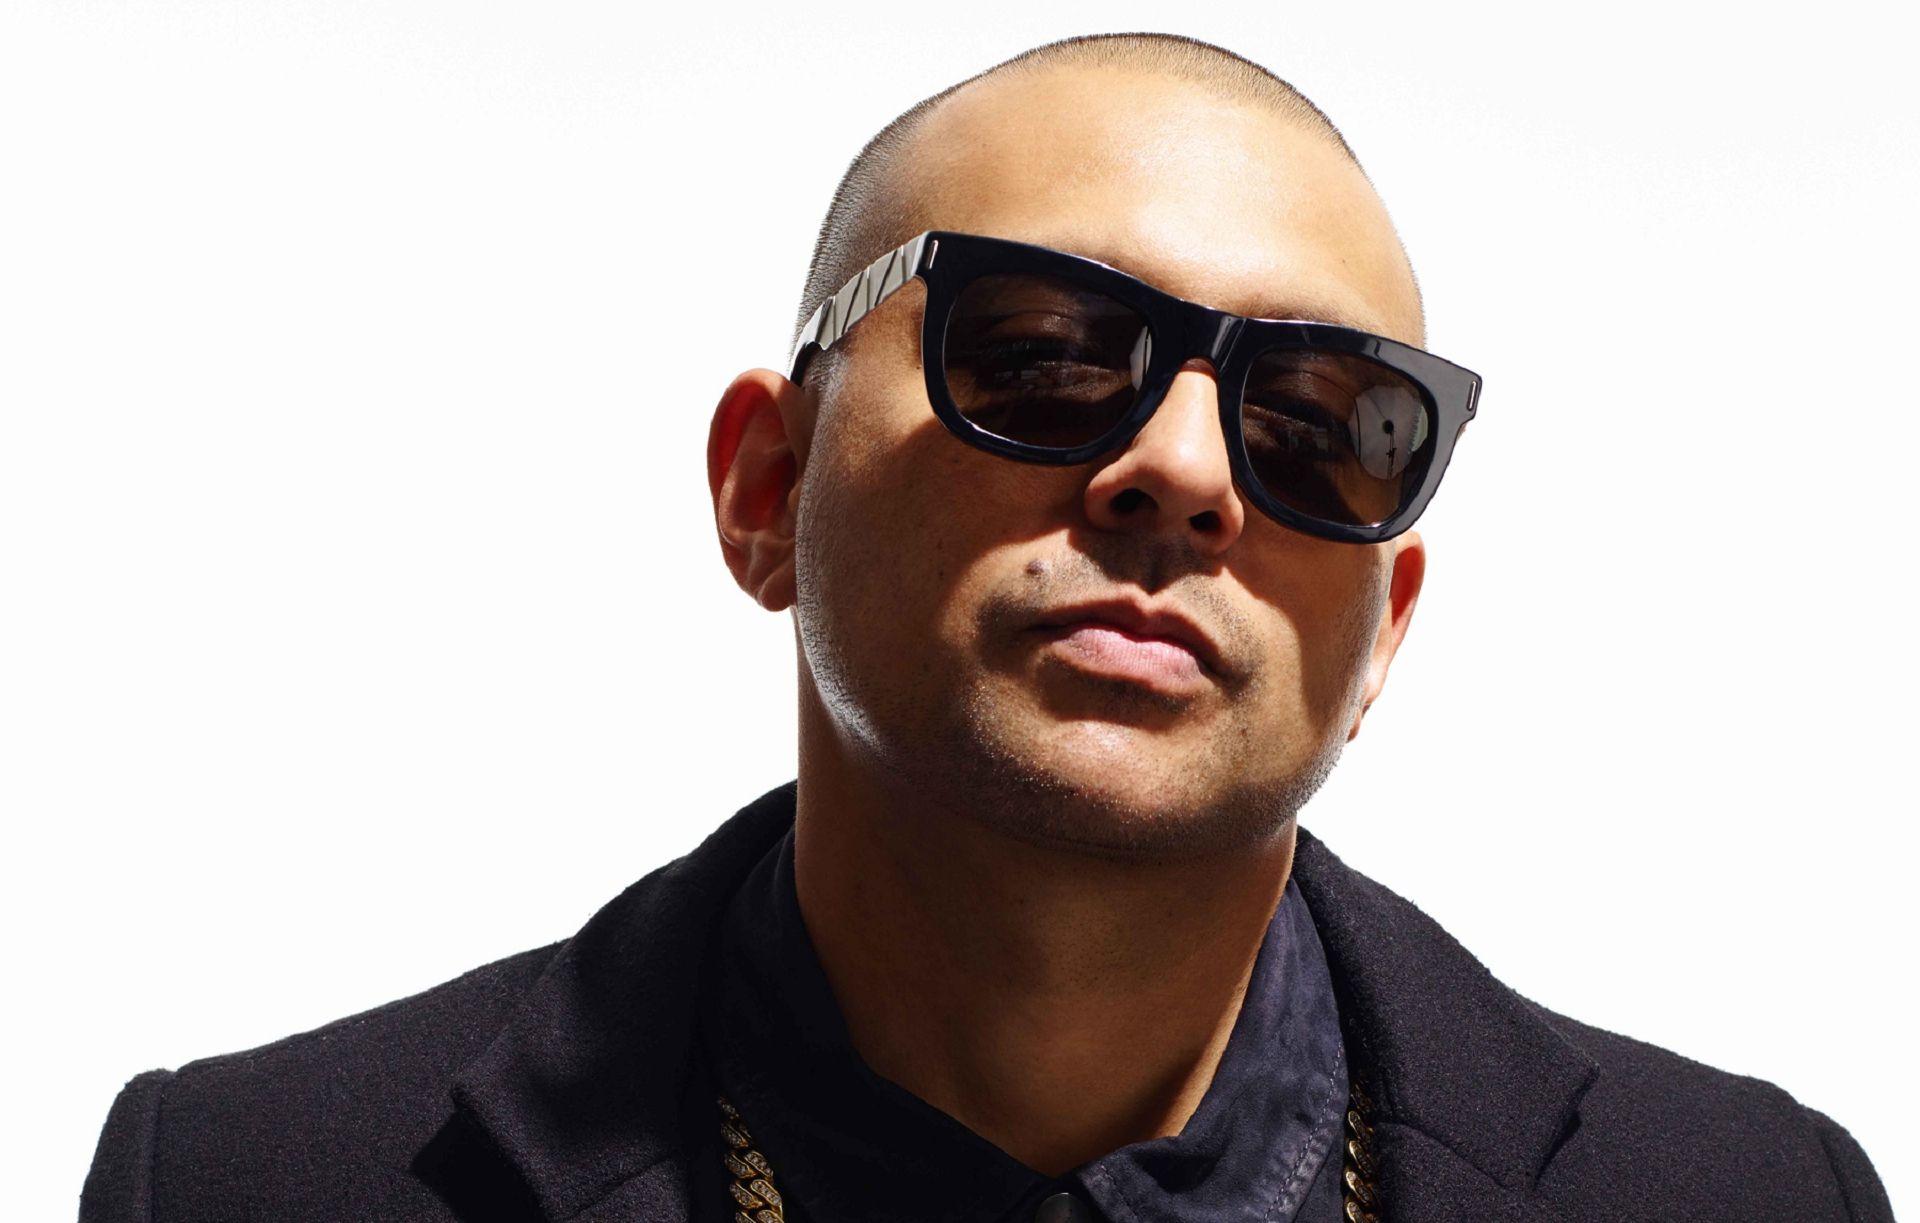 Sean Paul Wallpaper Image Photo Picture Background